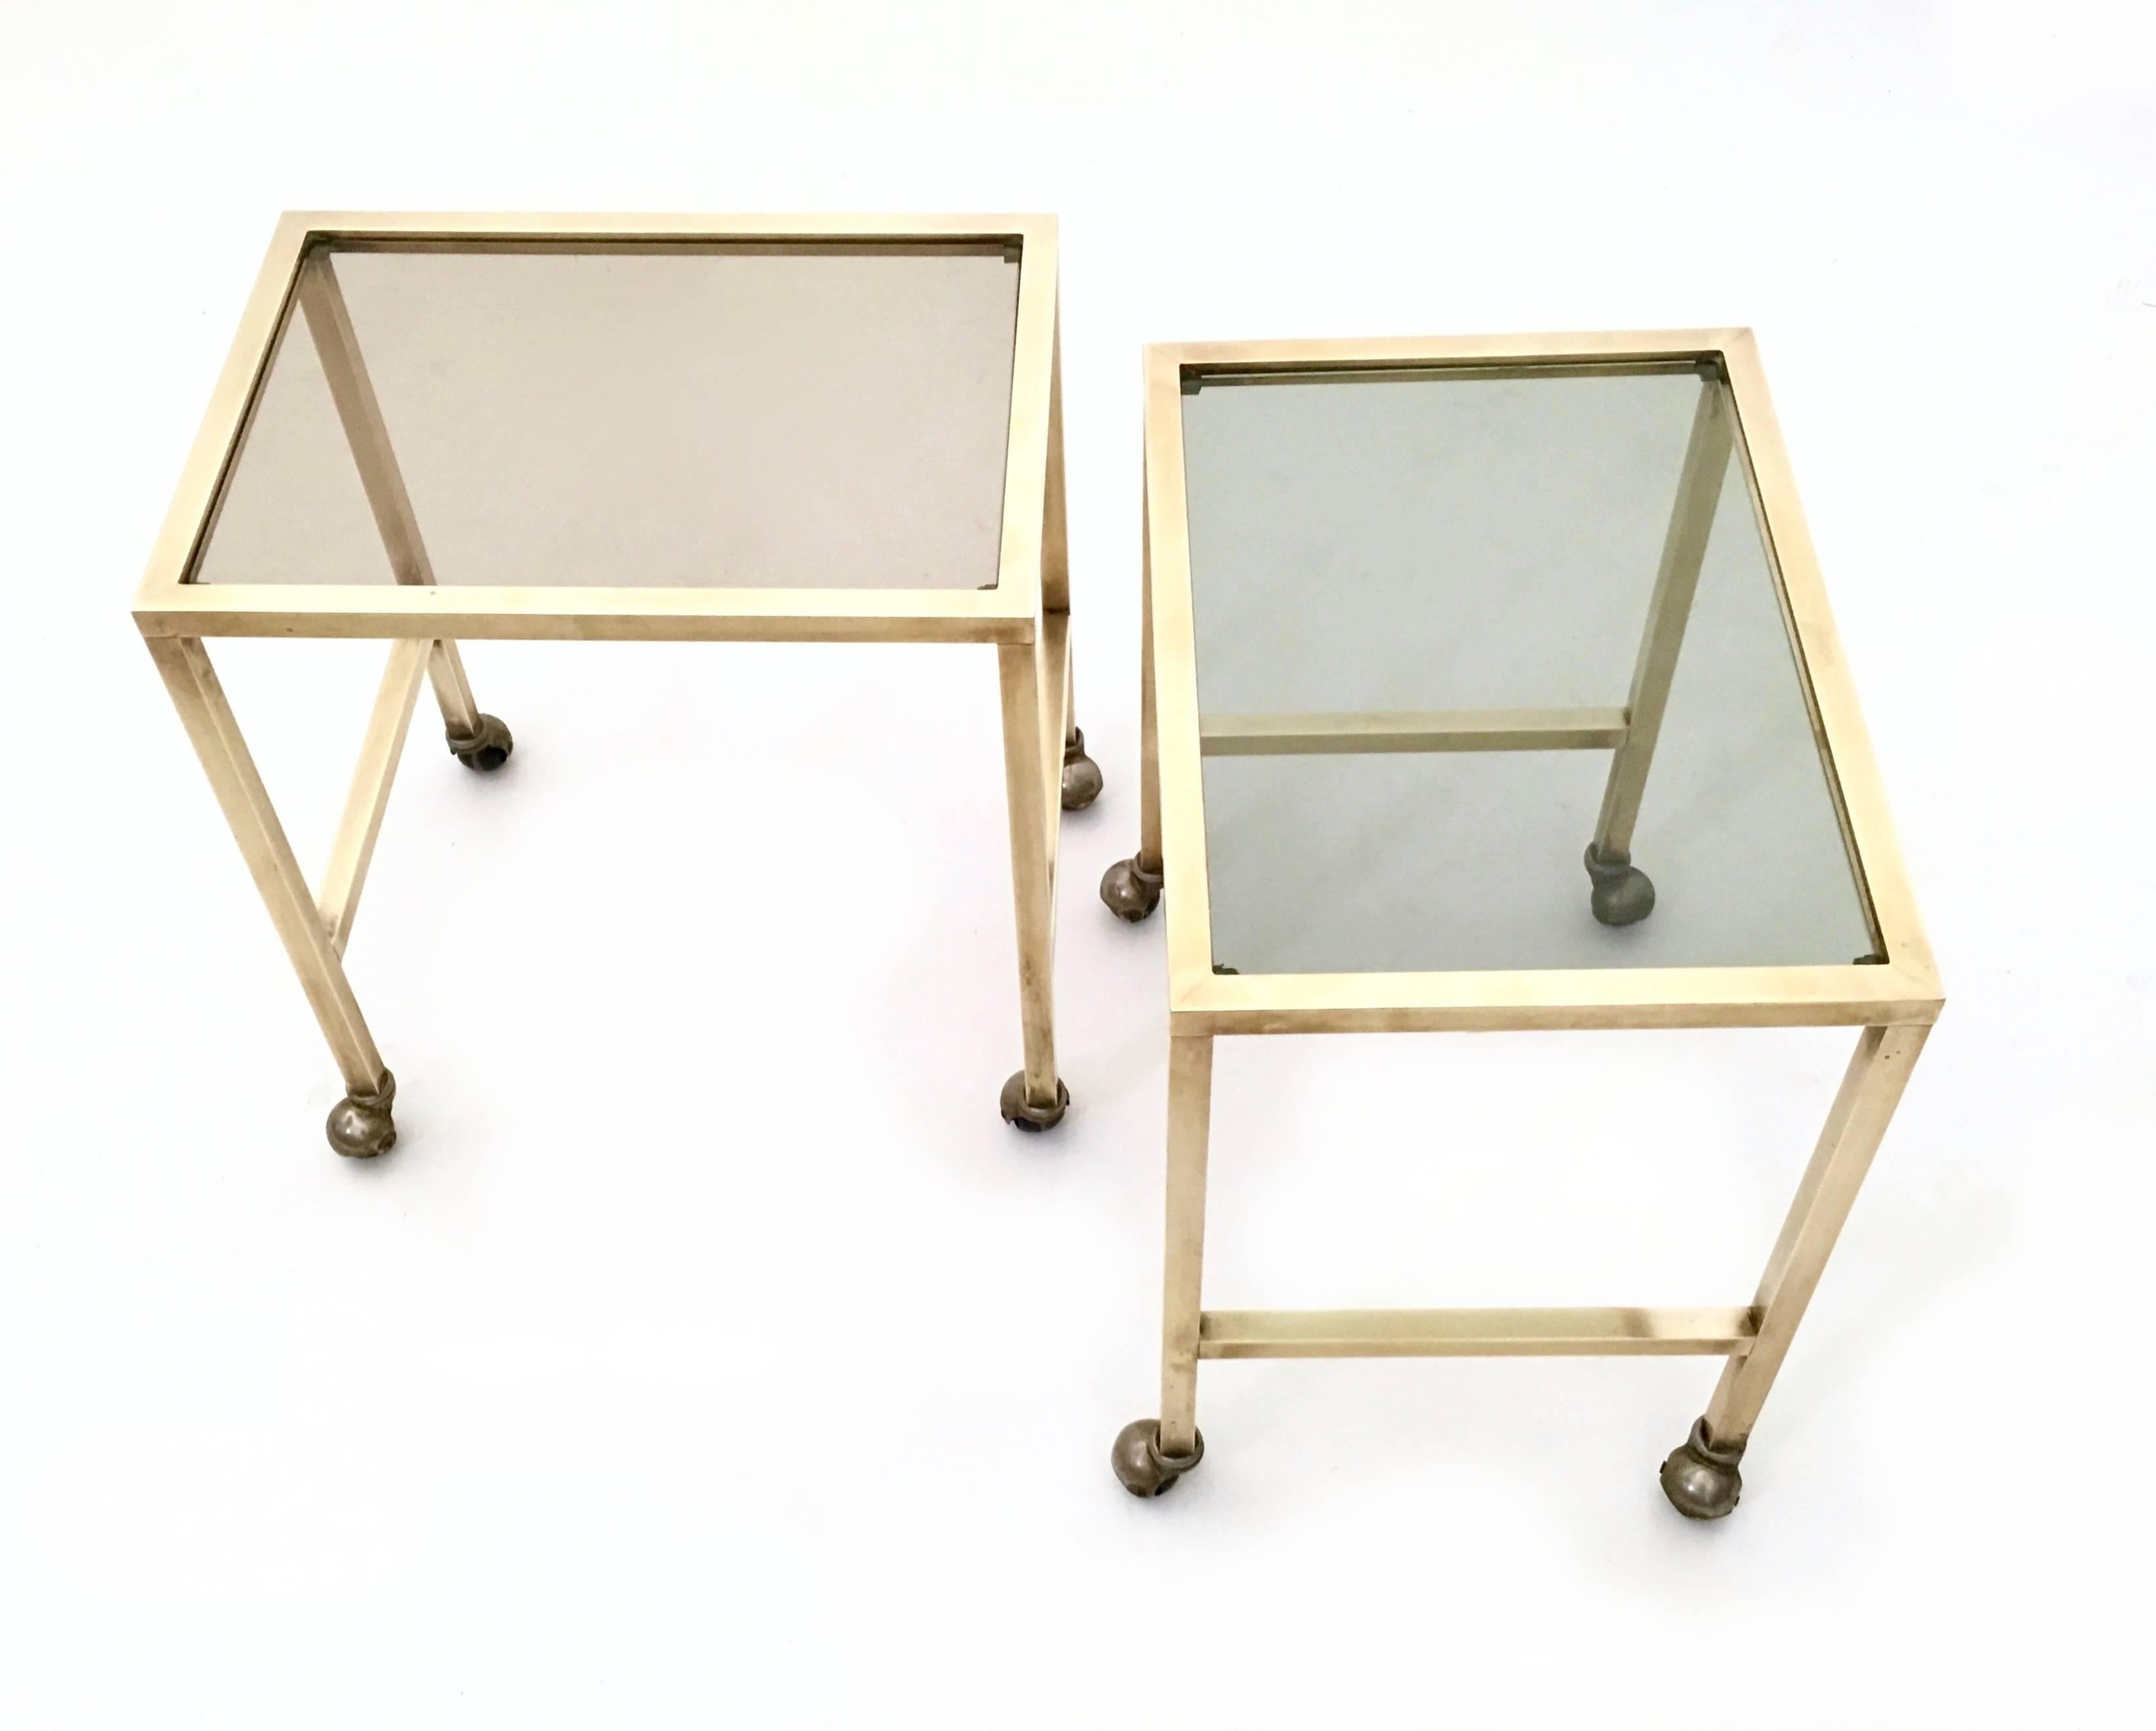 They feature a brass structure and a smoked glass top.
What is interesting about these two nightstands is that they are on casters.
In very good original condition.